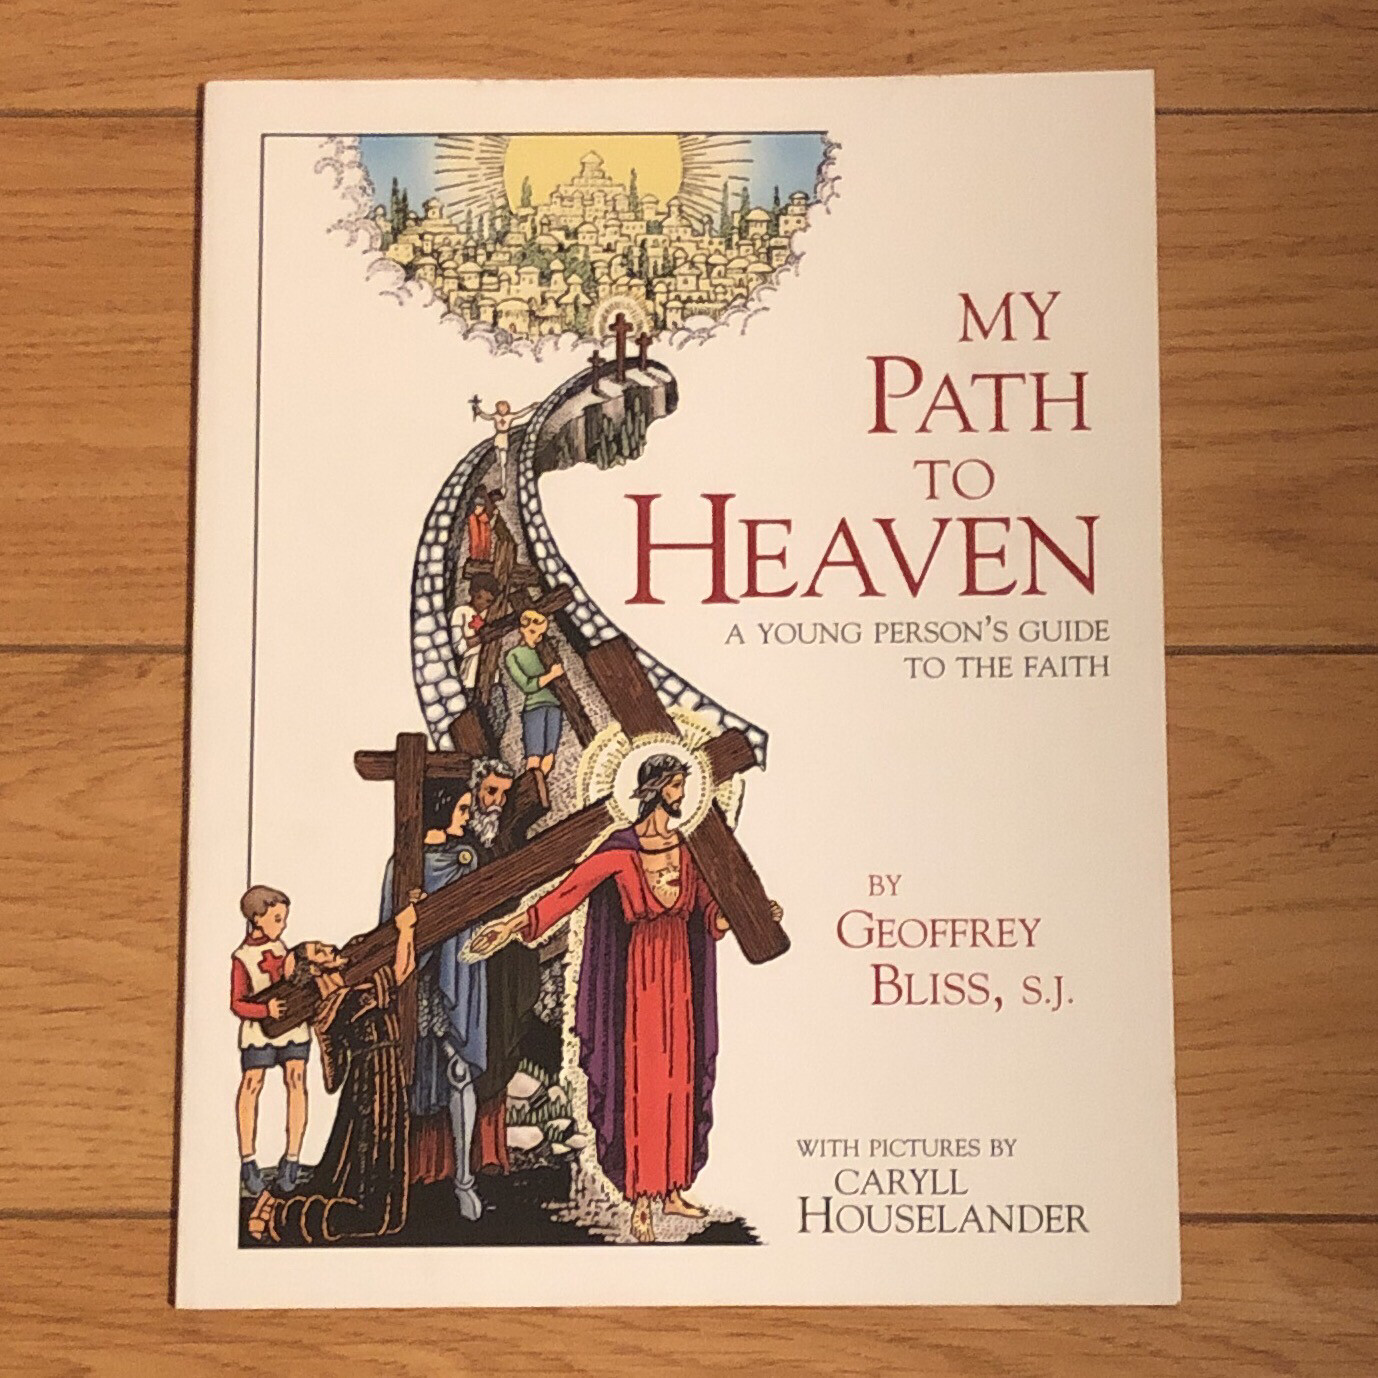 My Path to Heaven: A Young Person’s Guide to Faith by Geoffrey Bliss, SJ